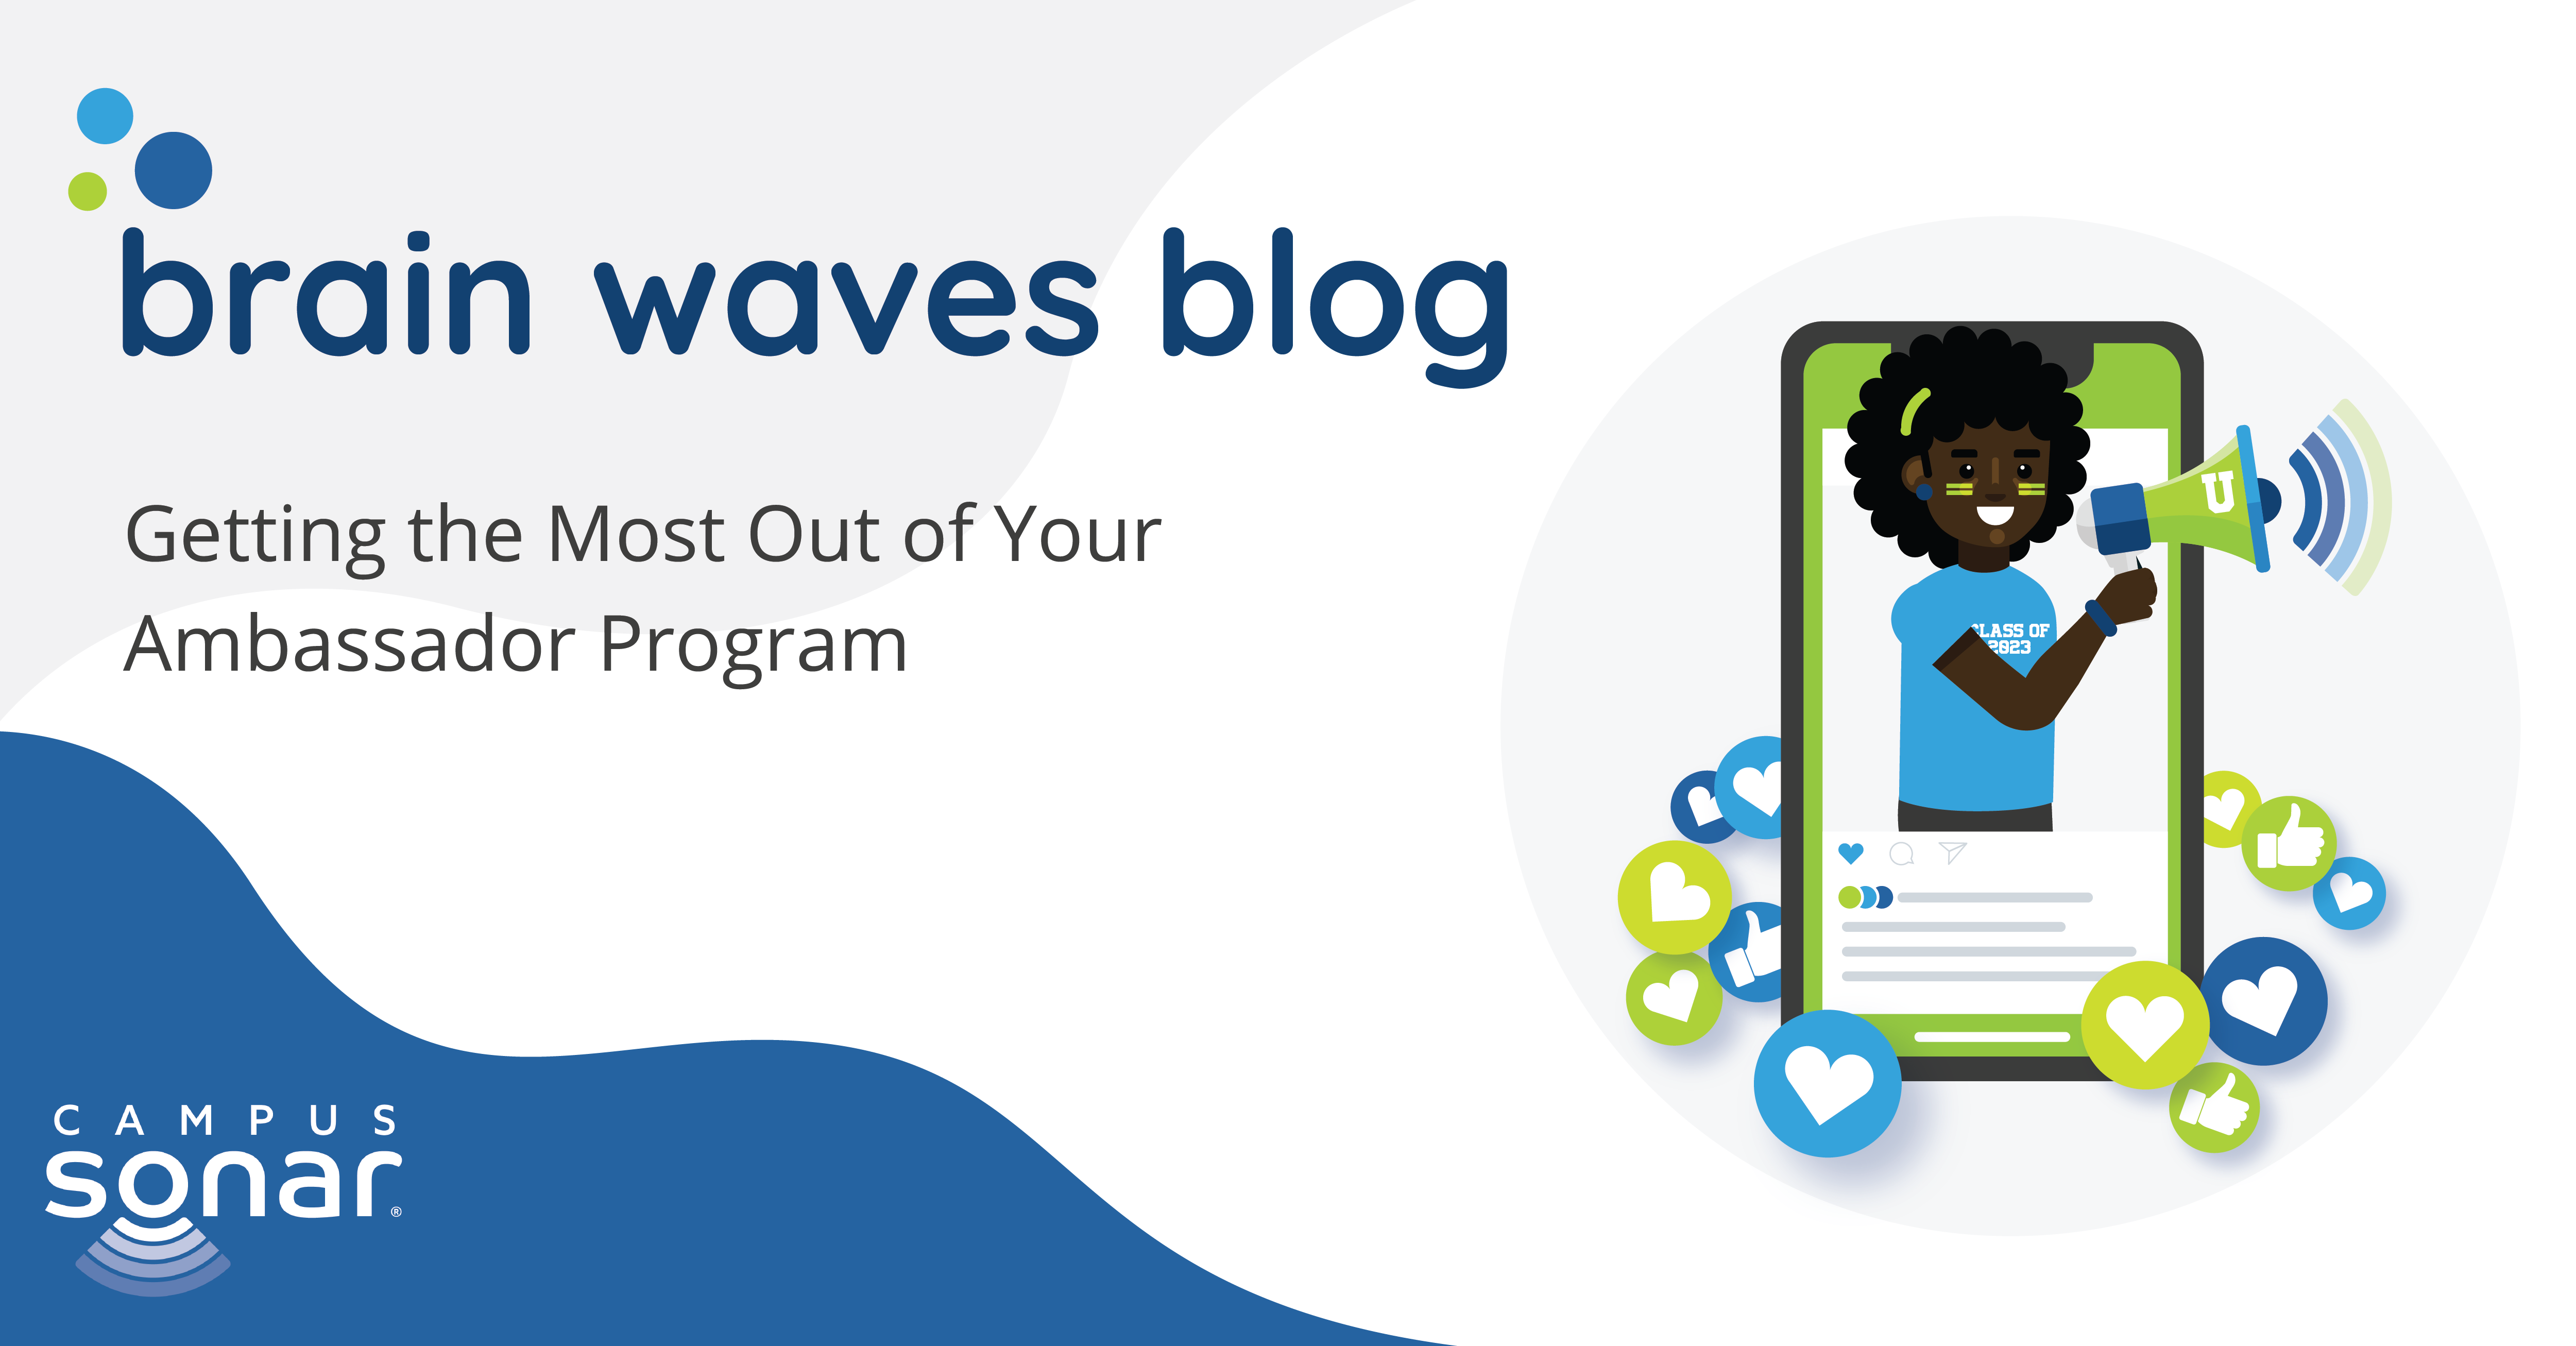 Brain Waves Blog: Getting the Most Out of Your Ambassador Program